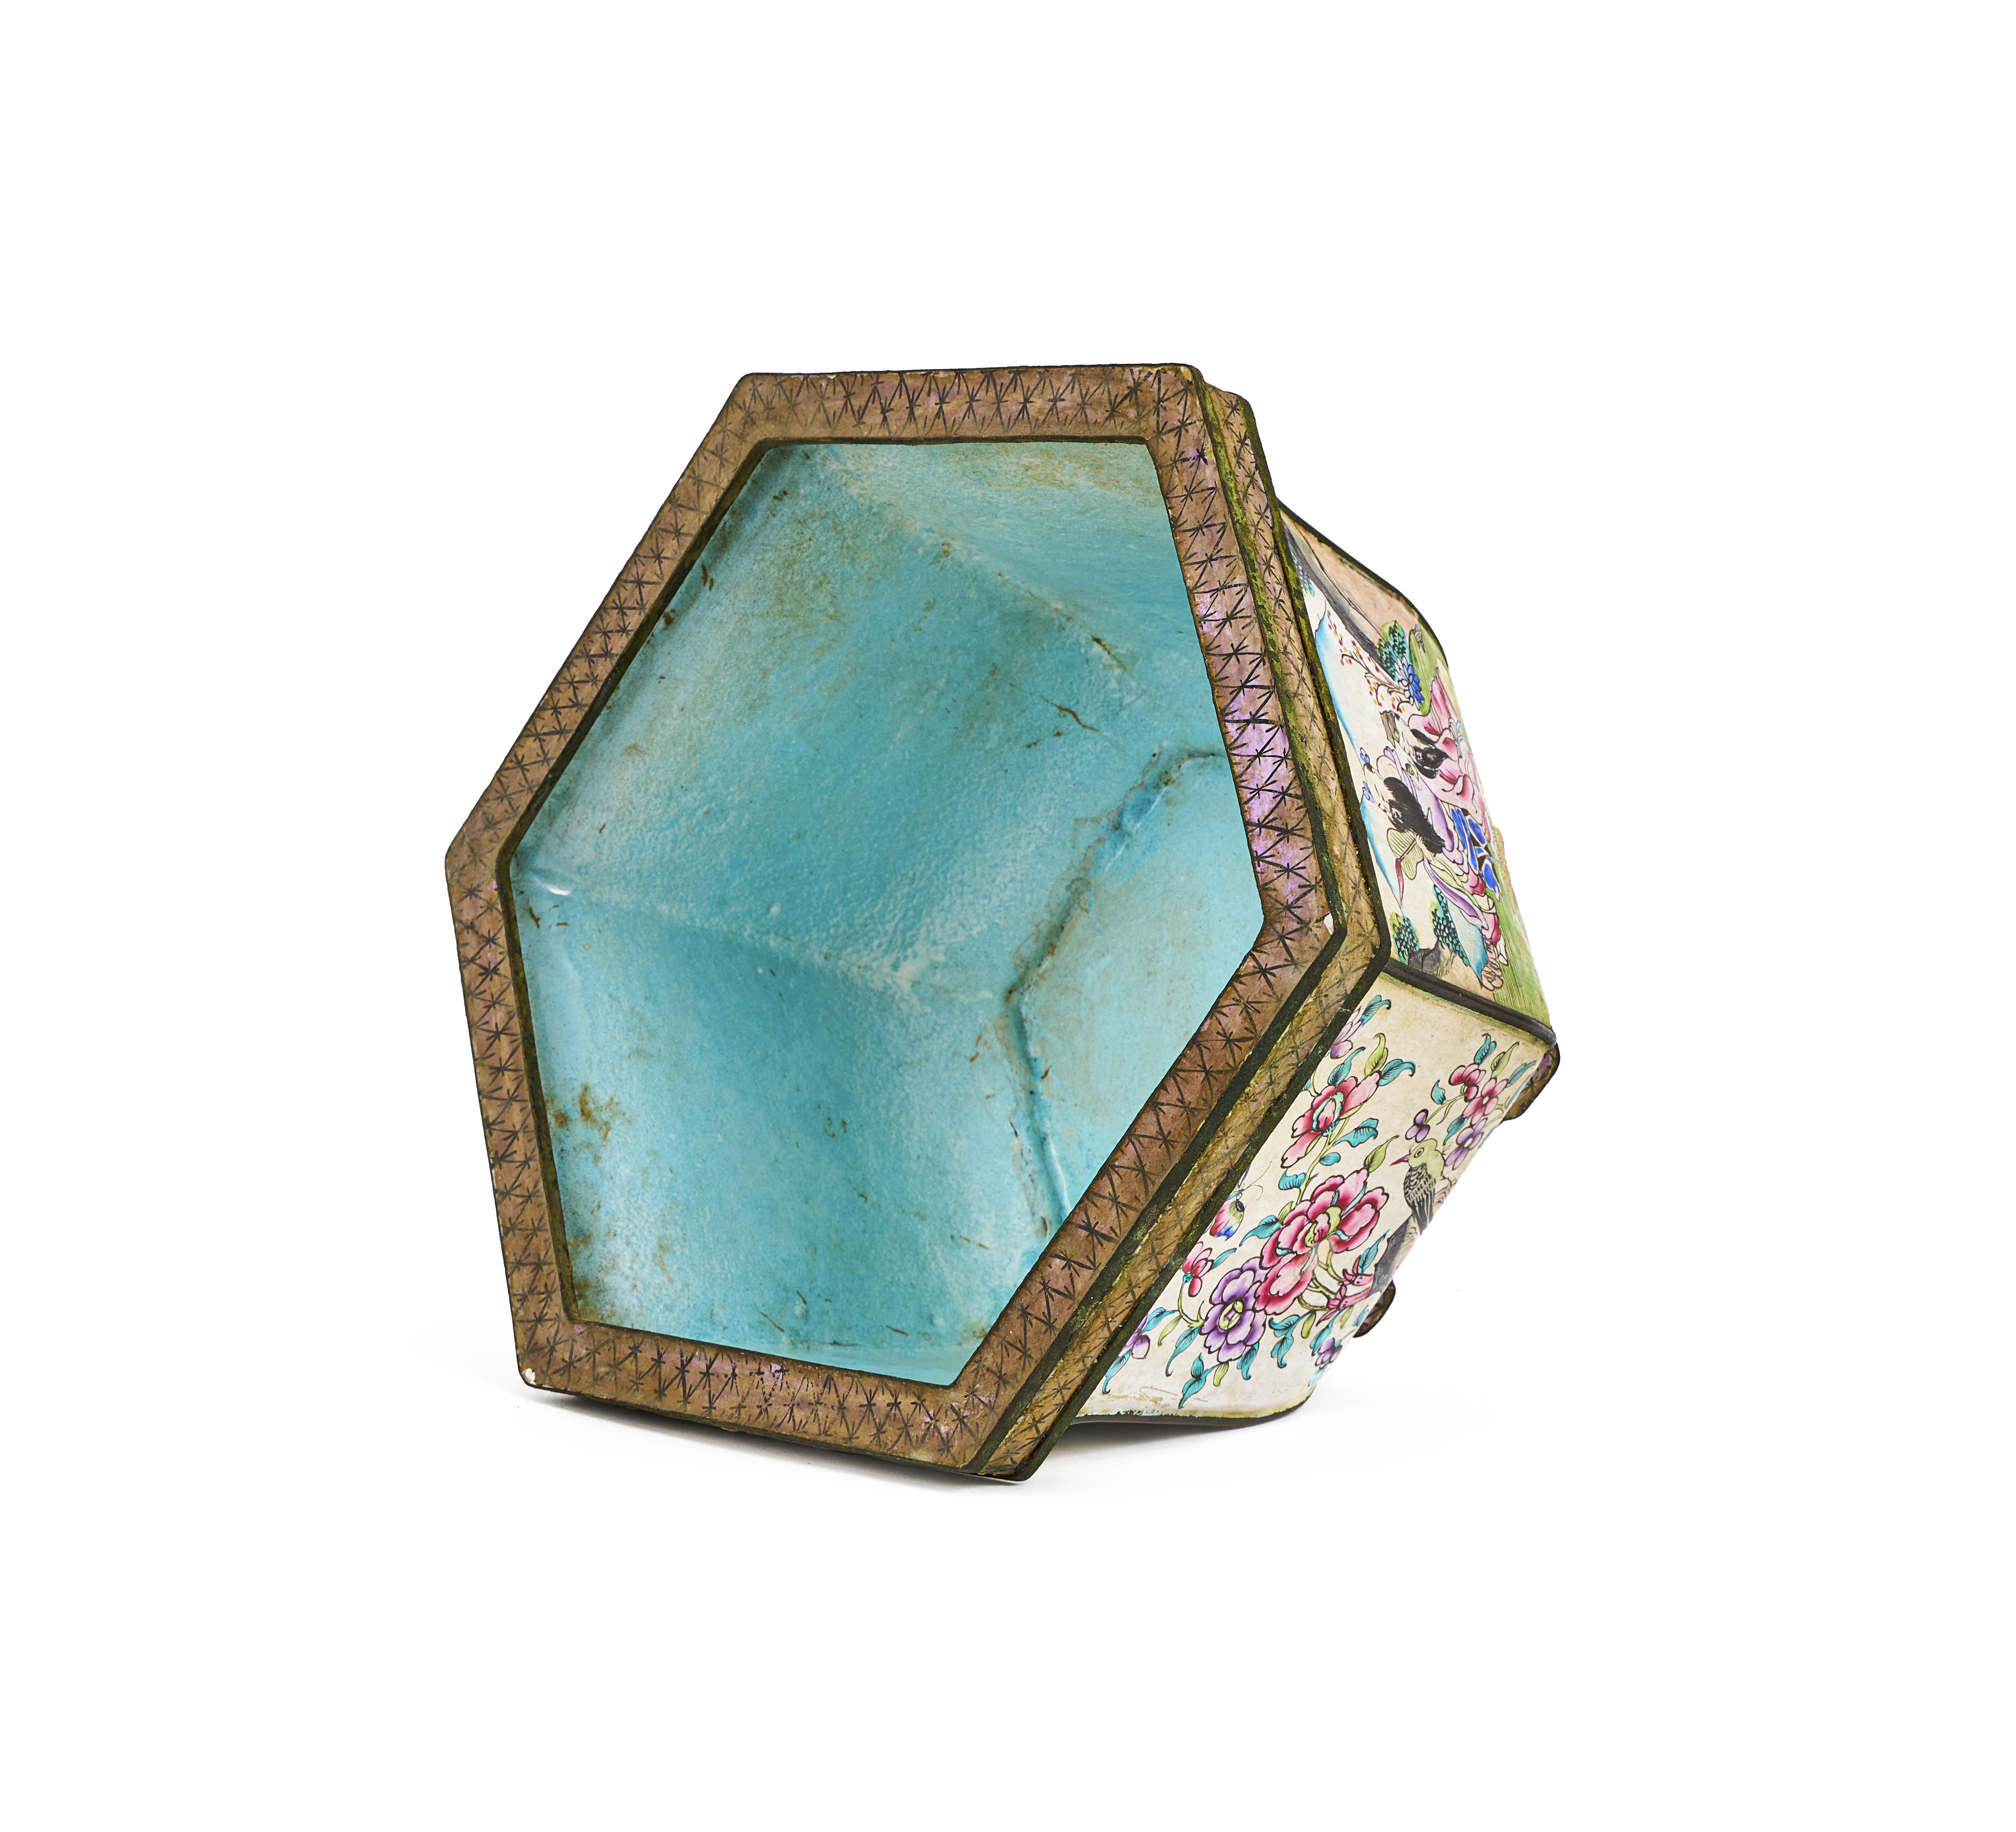 A CHINESE HEXAGONAL CANTON ENAMEL JARDINERE, QING DYNASTY (1644-1911) - Image 4 of 5